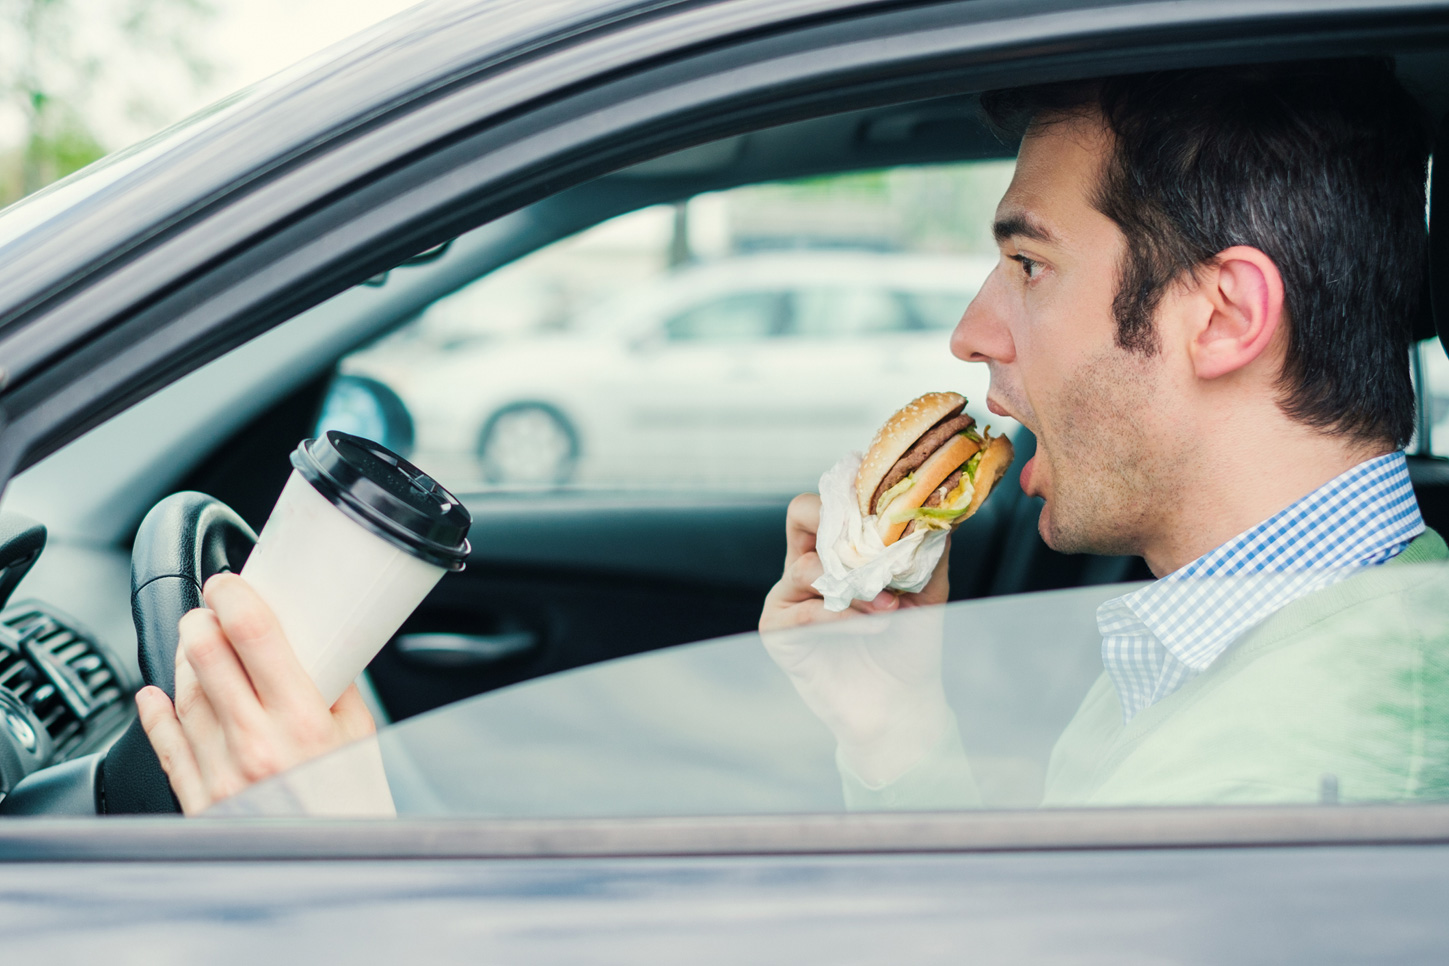 Man eating a burger and holding a coffee cup whilst trying to steer a car